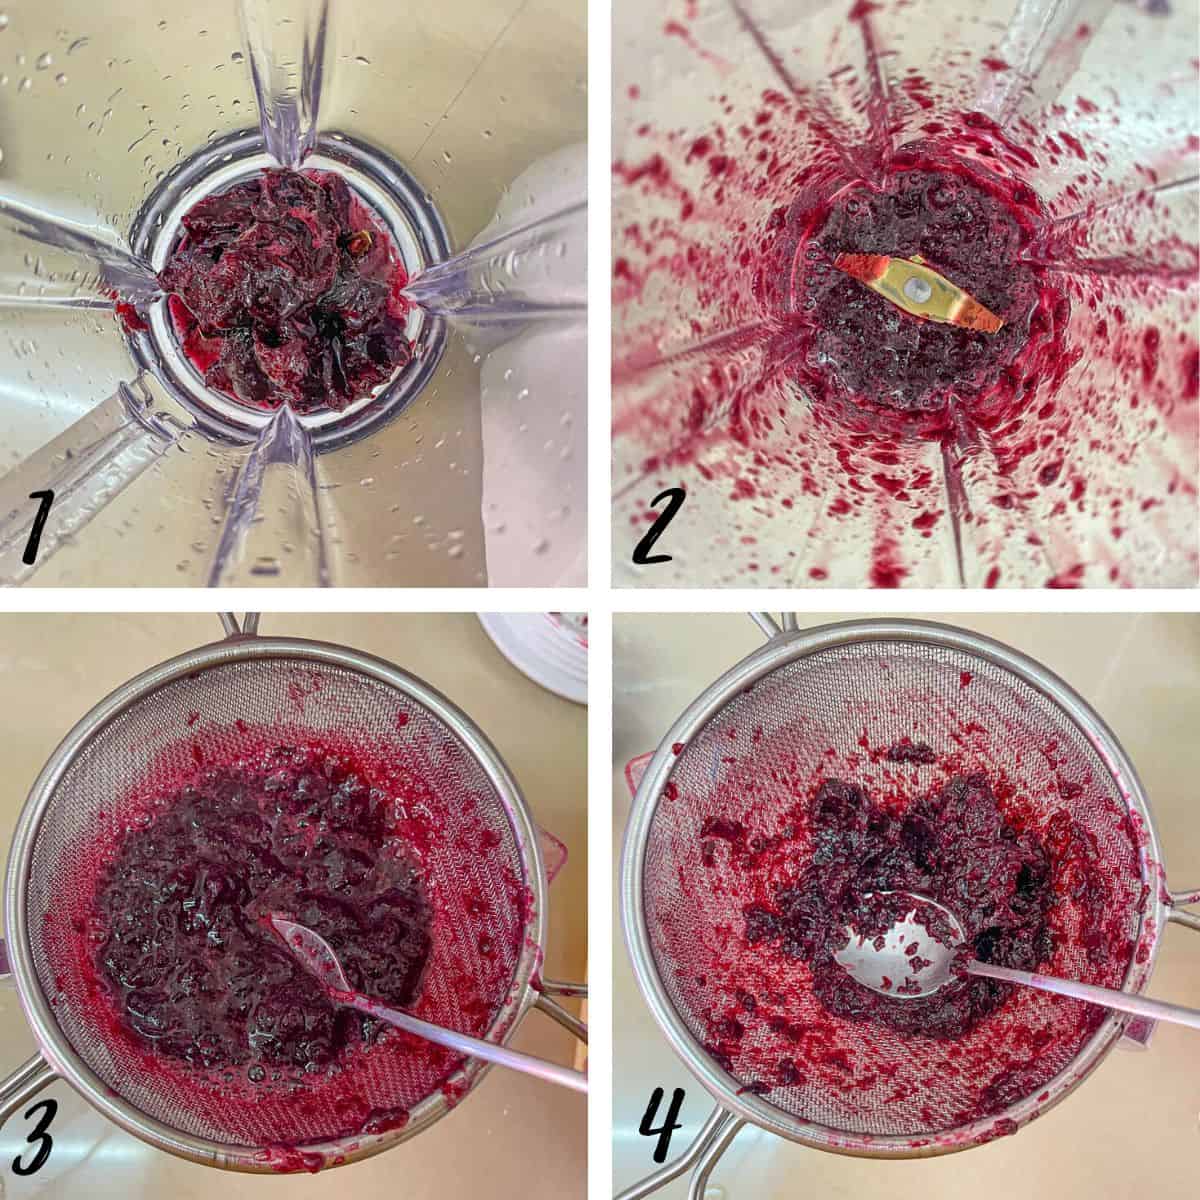 A poster of 4 images showing how to blend and strain cooked cherries.